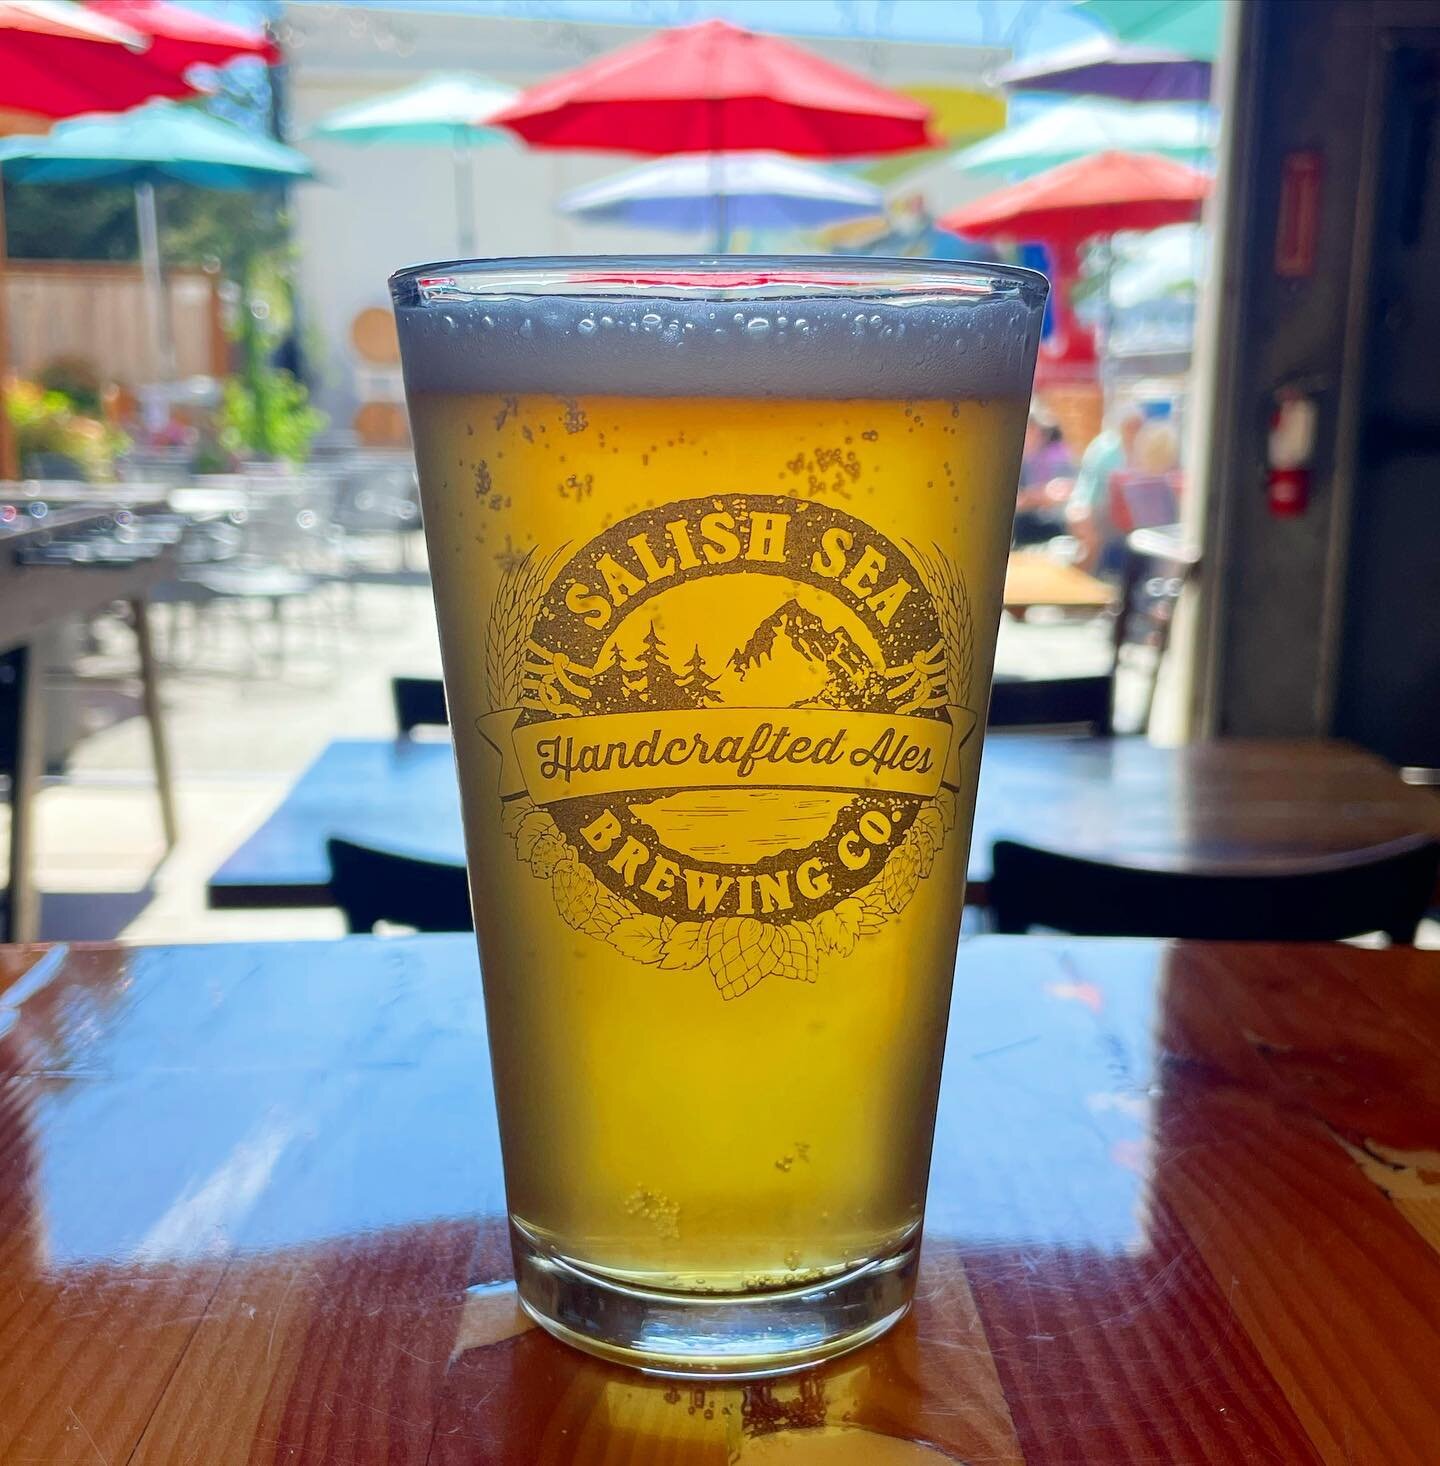 Friends With Benefits, our Cold IPA collaboration with @gallagherswhereubrew is back on tap at both locations.

Brewed using Kolsch yeast and fermented at a lower temperature than traditional IPAs.  The result is a clean, clear, light bodied sneaky s